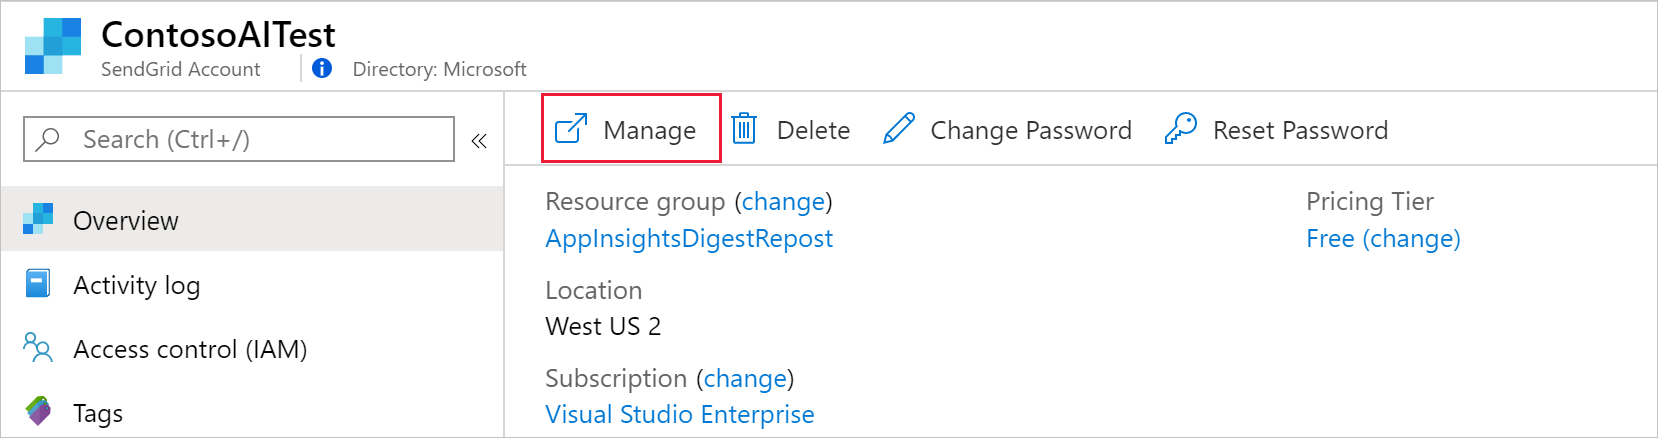 Screenshot that shows the Manage button.